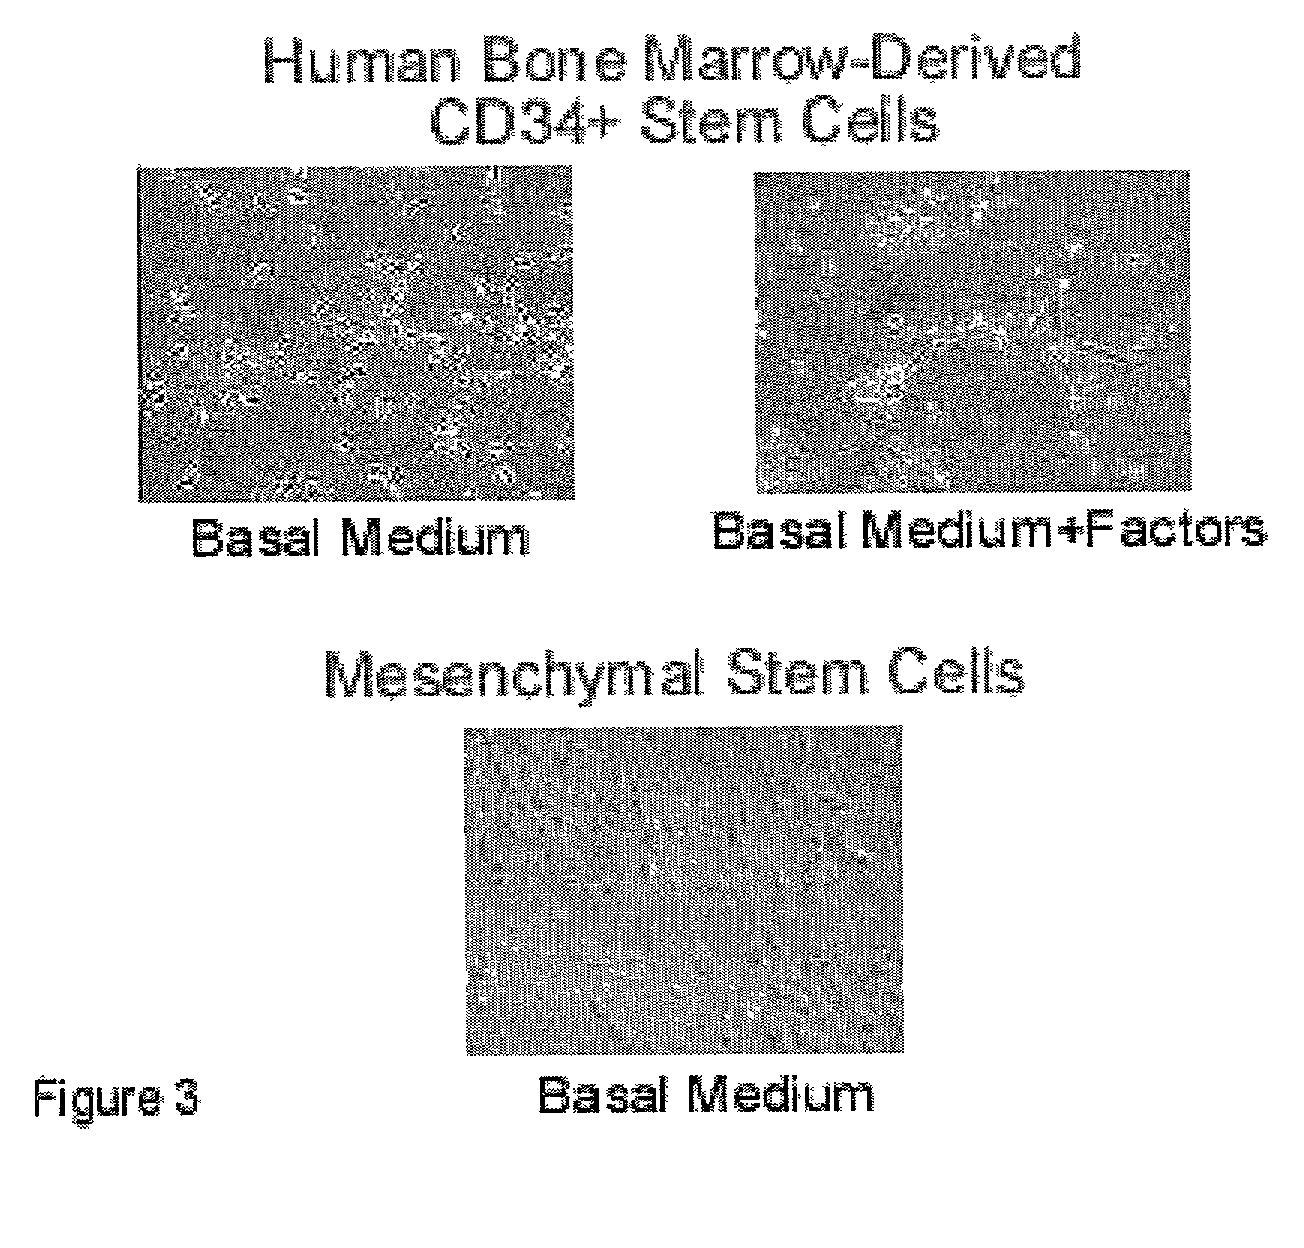 Method for transdifferentiation of non-pancreatic stem cells to the pancreatic differentiation pathway